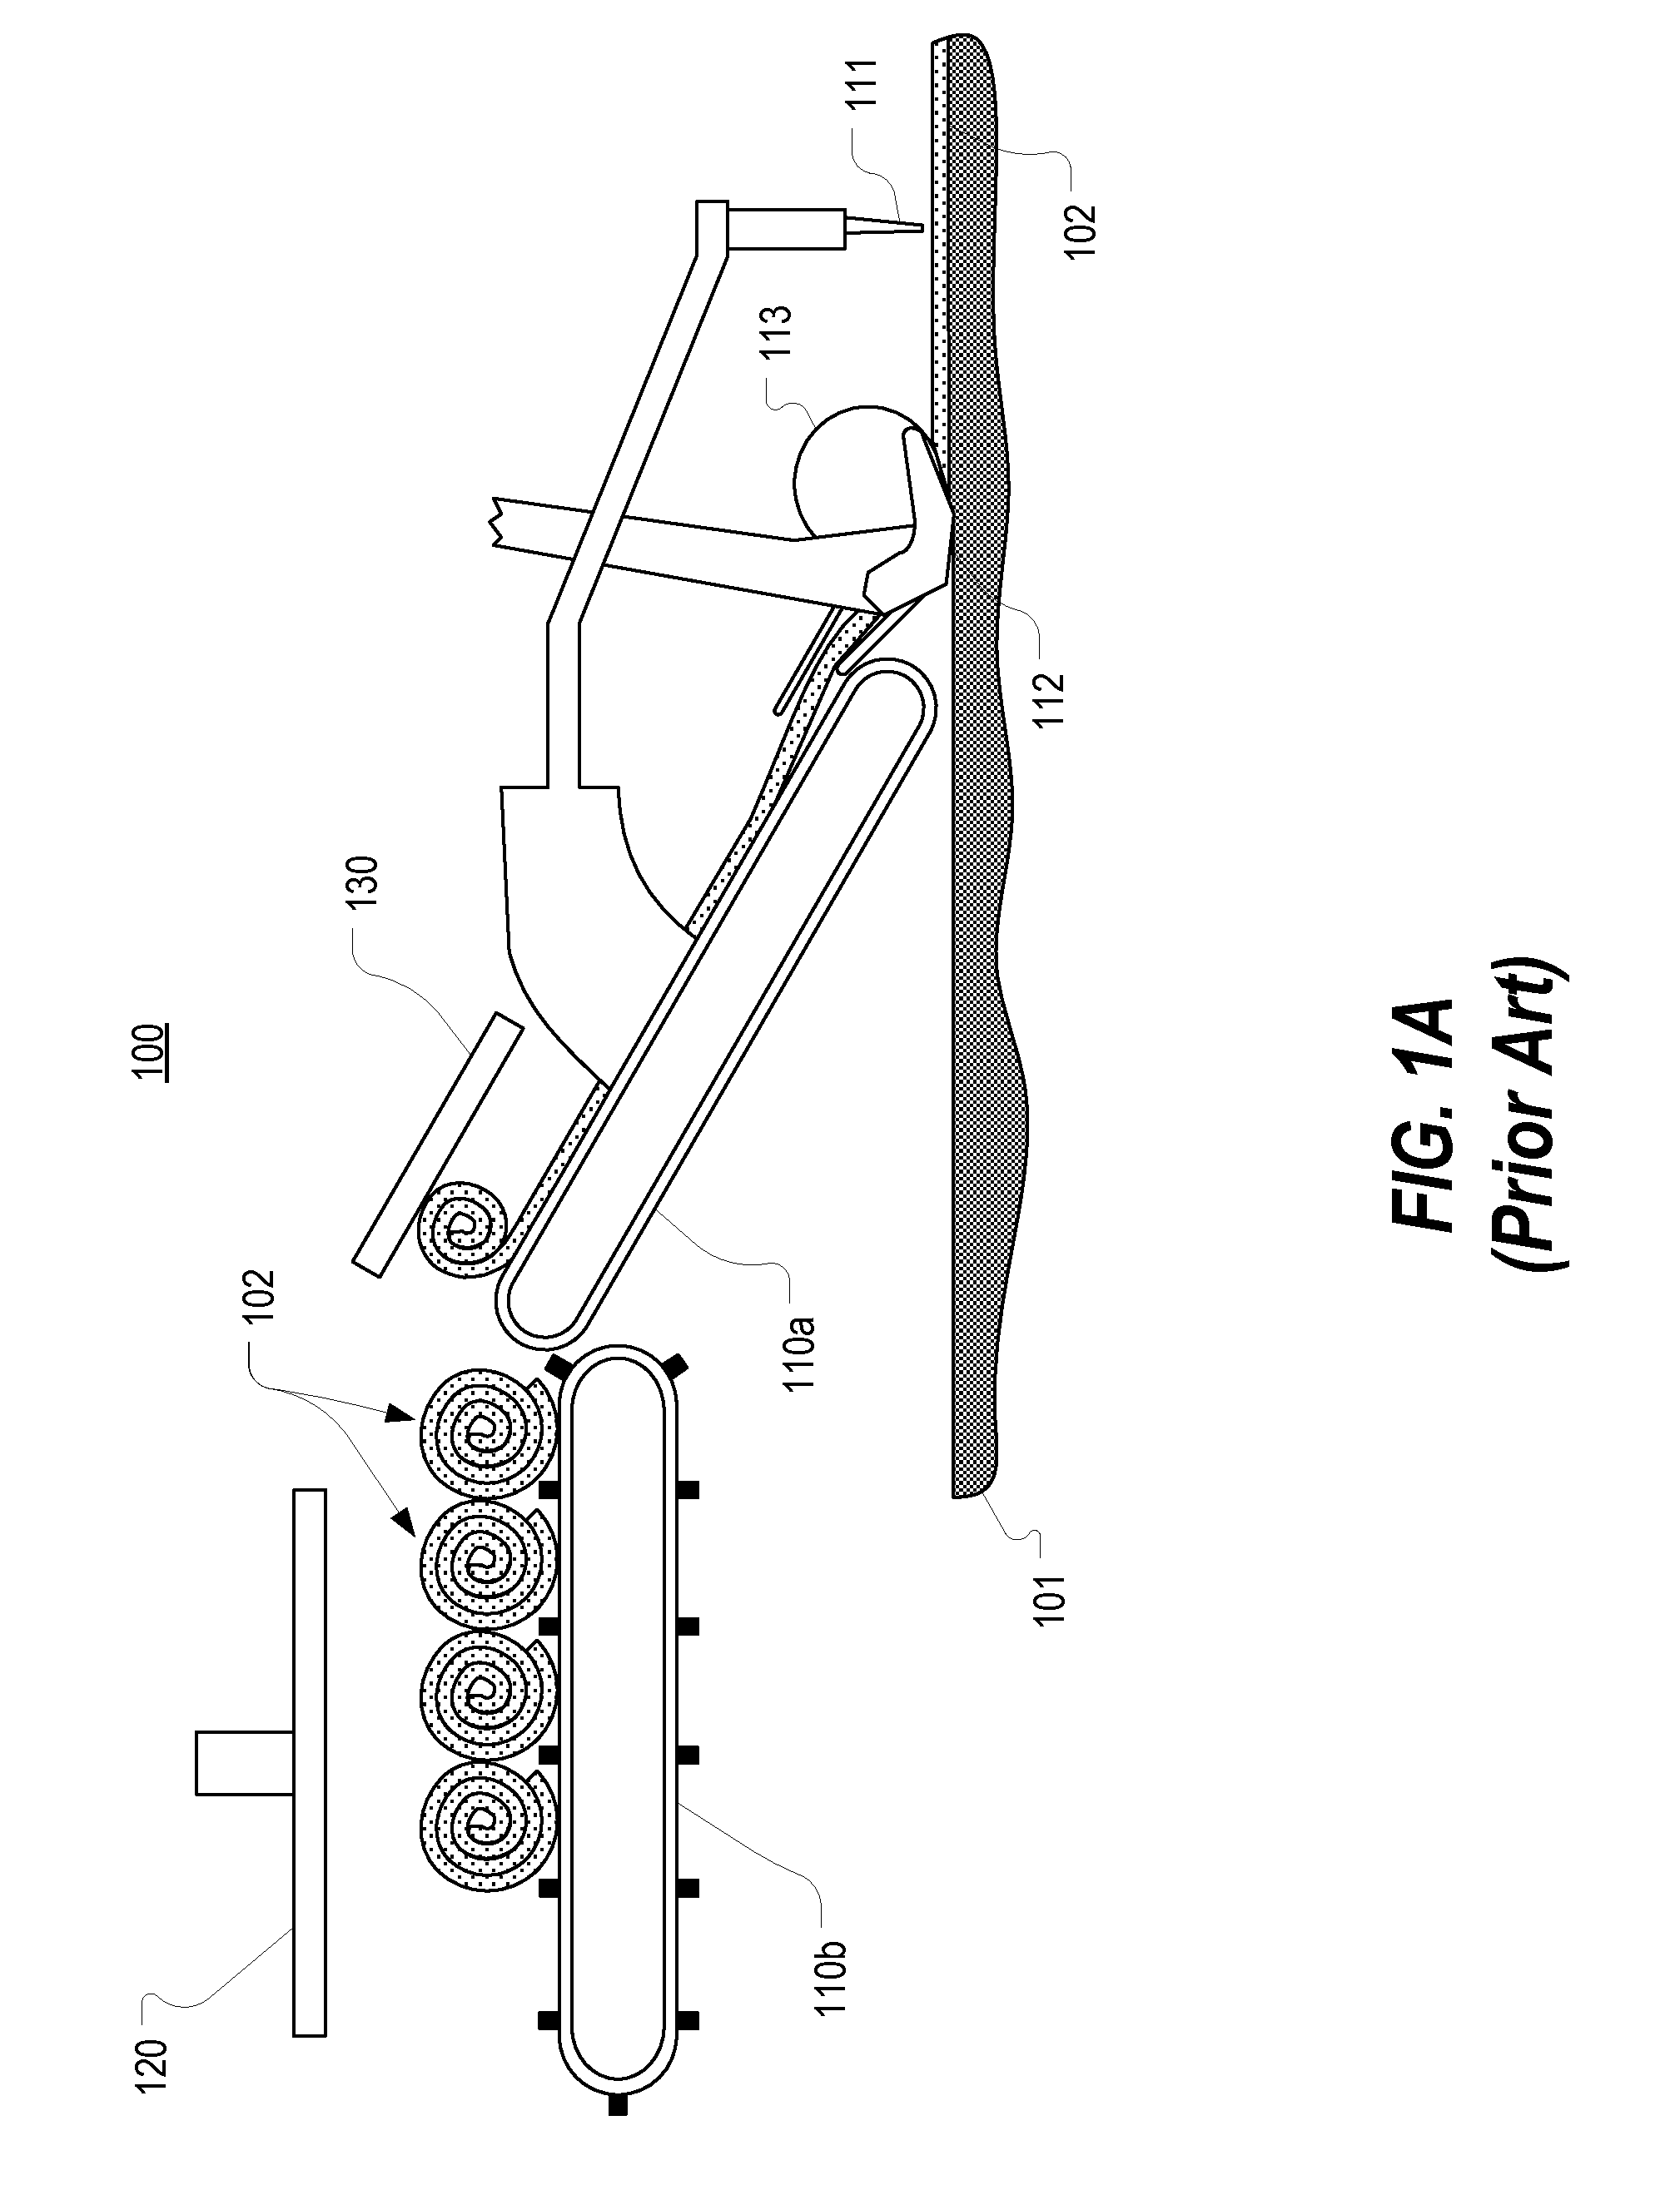 Sod harvester stacking head that is movable with a stacking conveyor